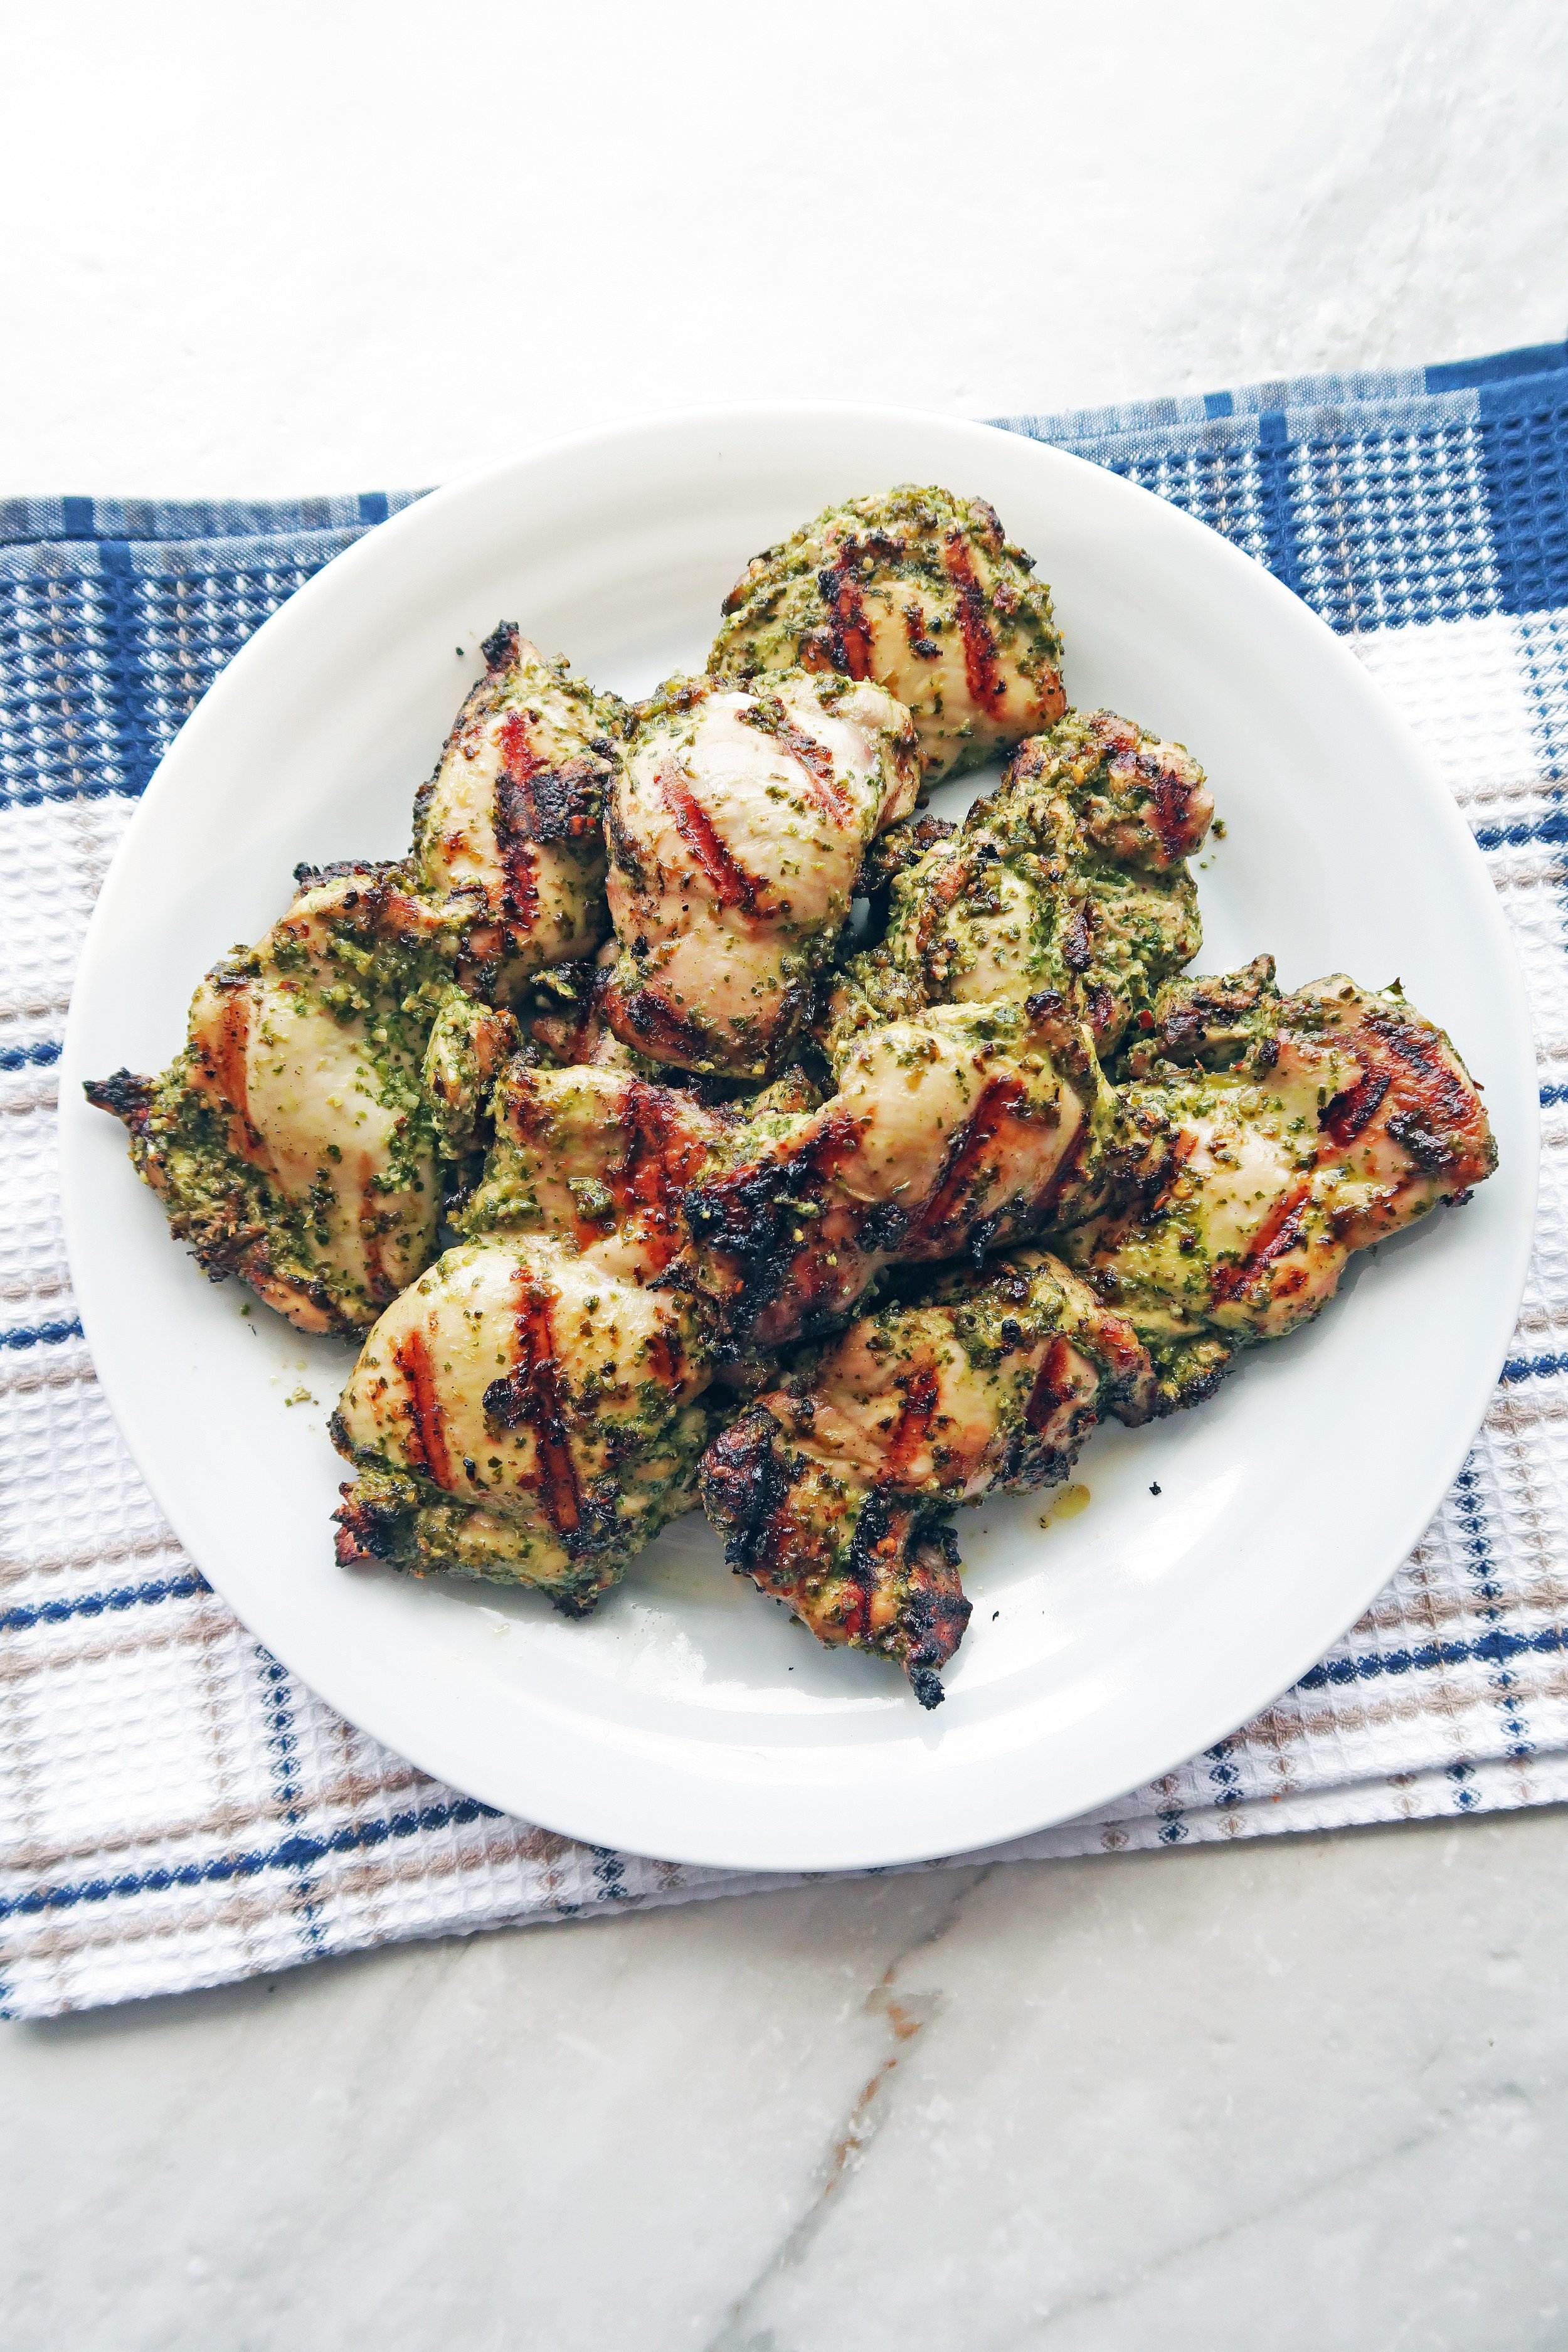 Overhead view of a white plate Grilled Chicken Thighs with Chimichurri Sauce on top of a blue checkered towel.